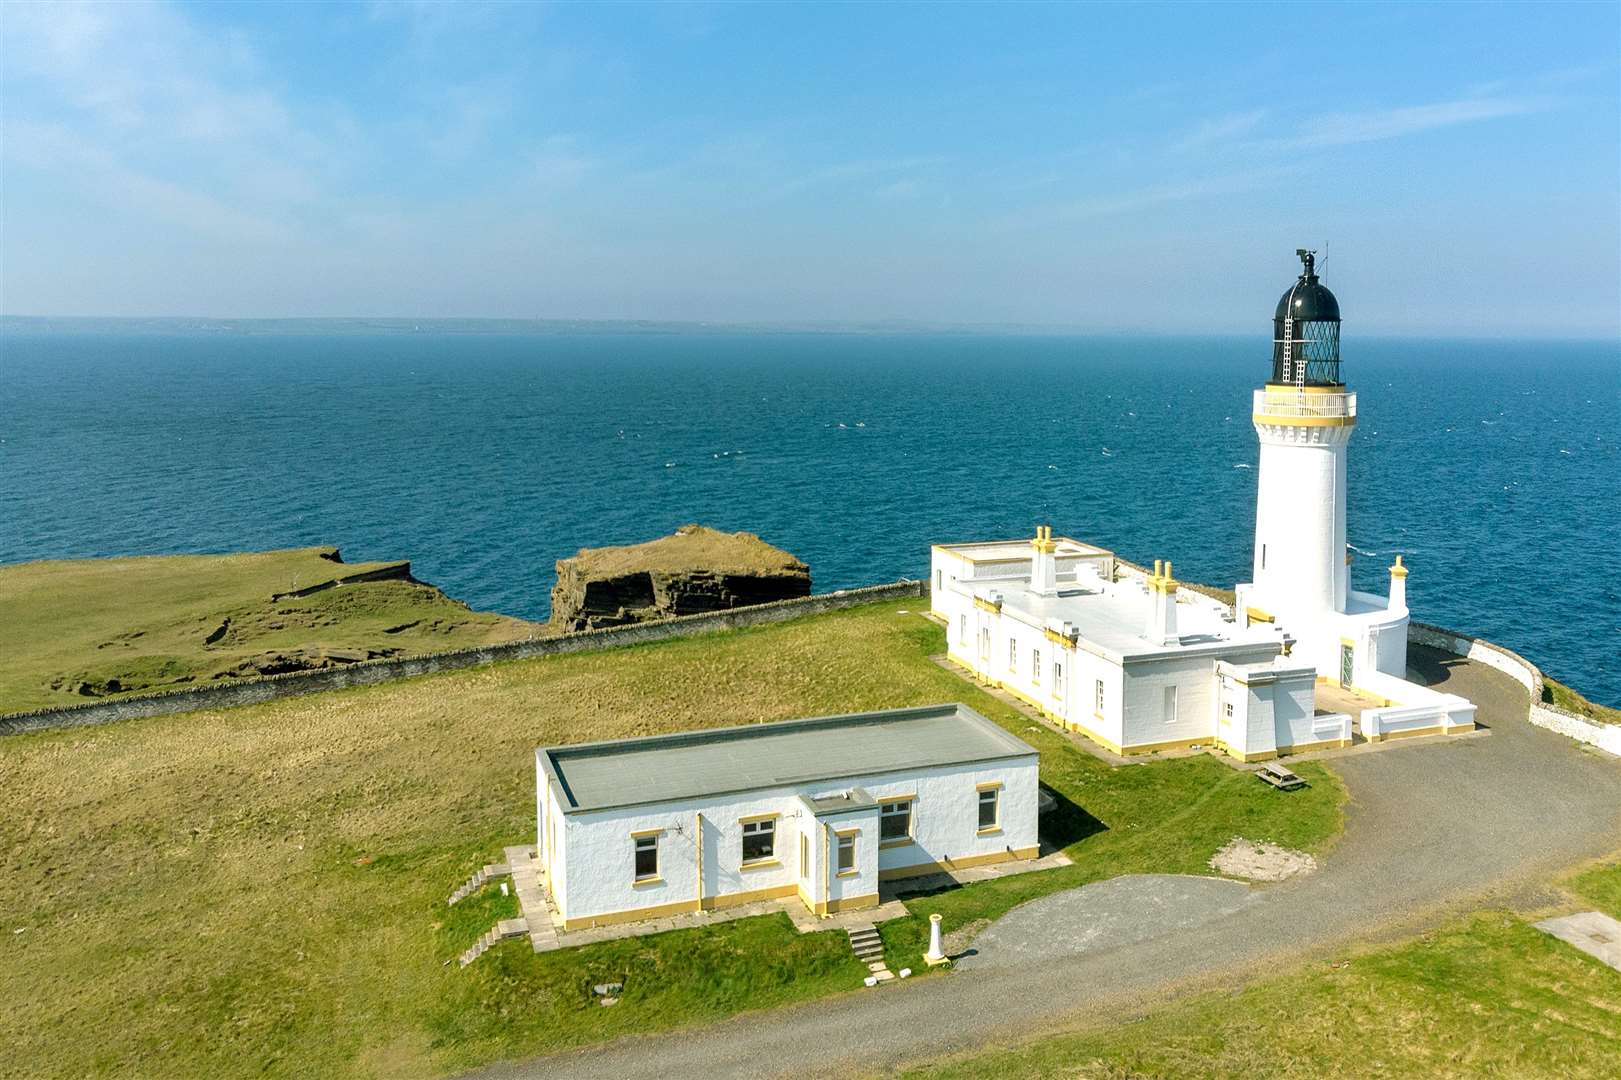 The Noss Head lighthouse provides a scenic escape for holidaymakers.